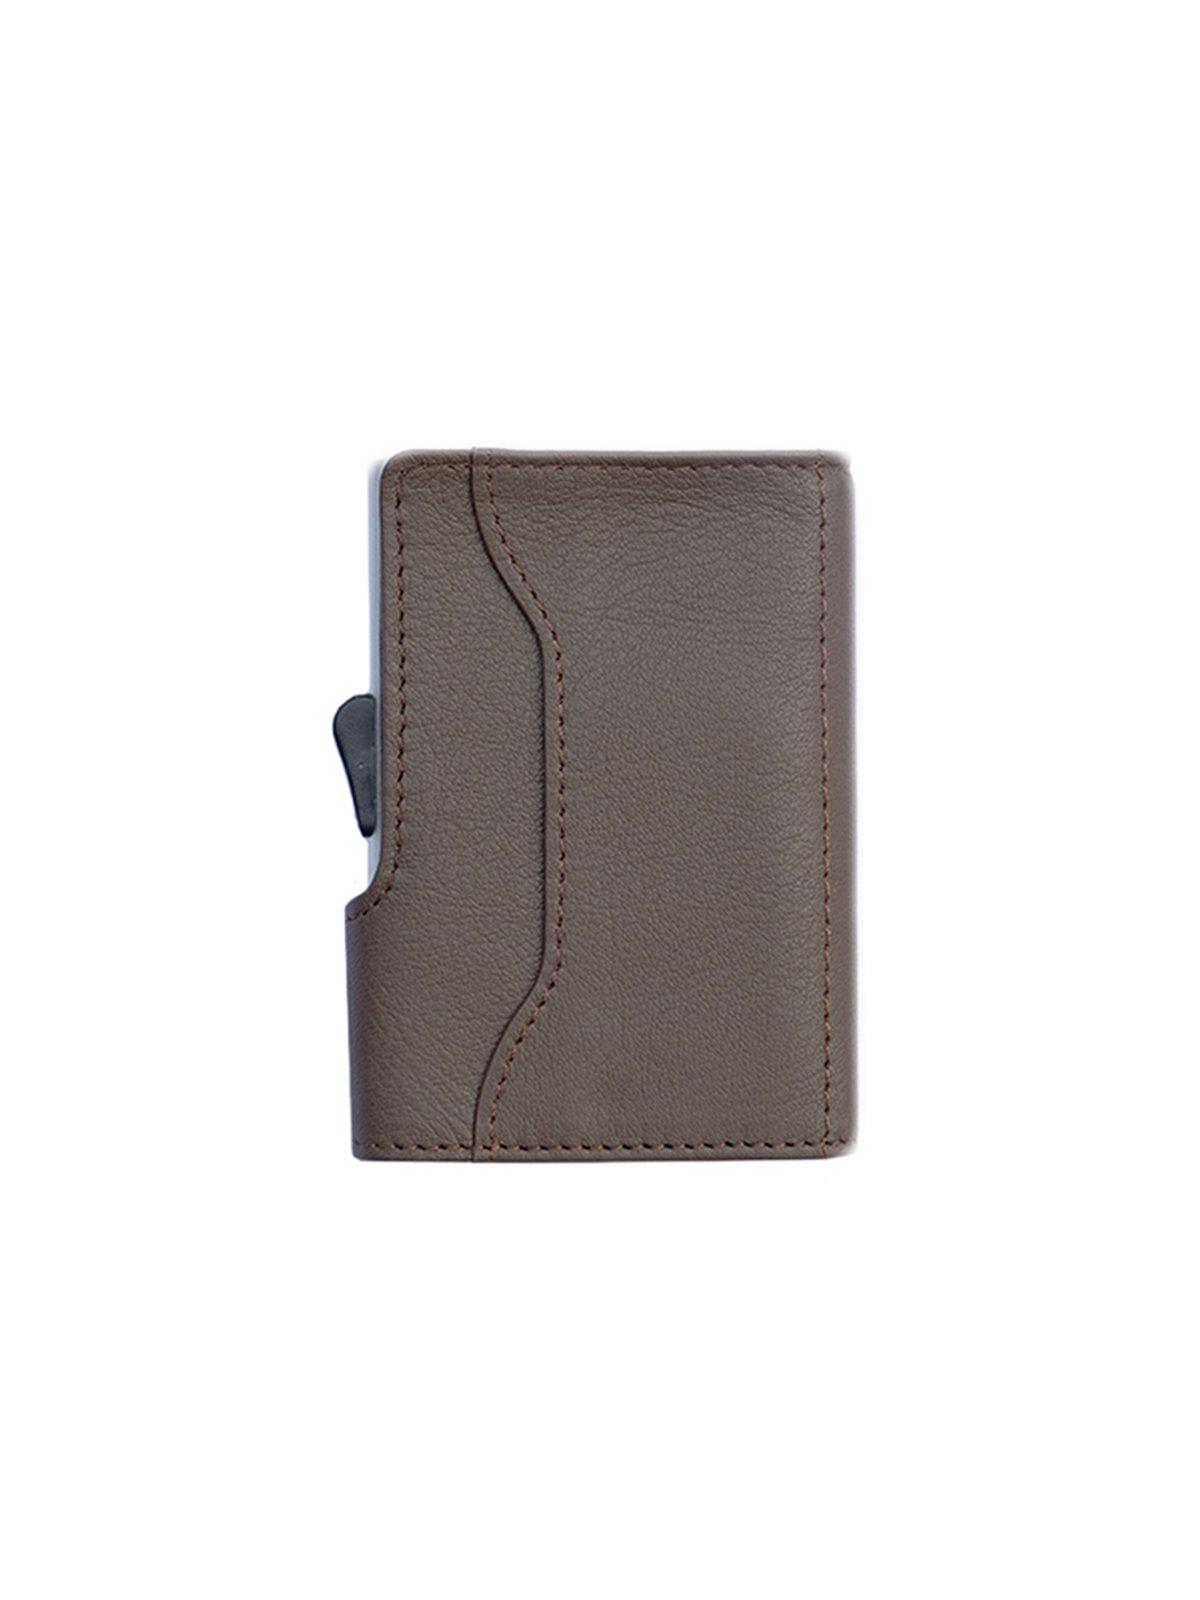 C-Secure Italian Leather RFID Wallet Castagno - MORE by Morello Indonesia